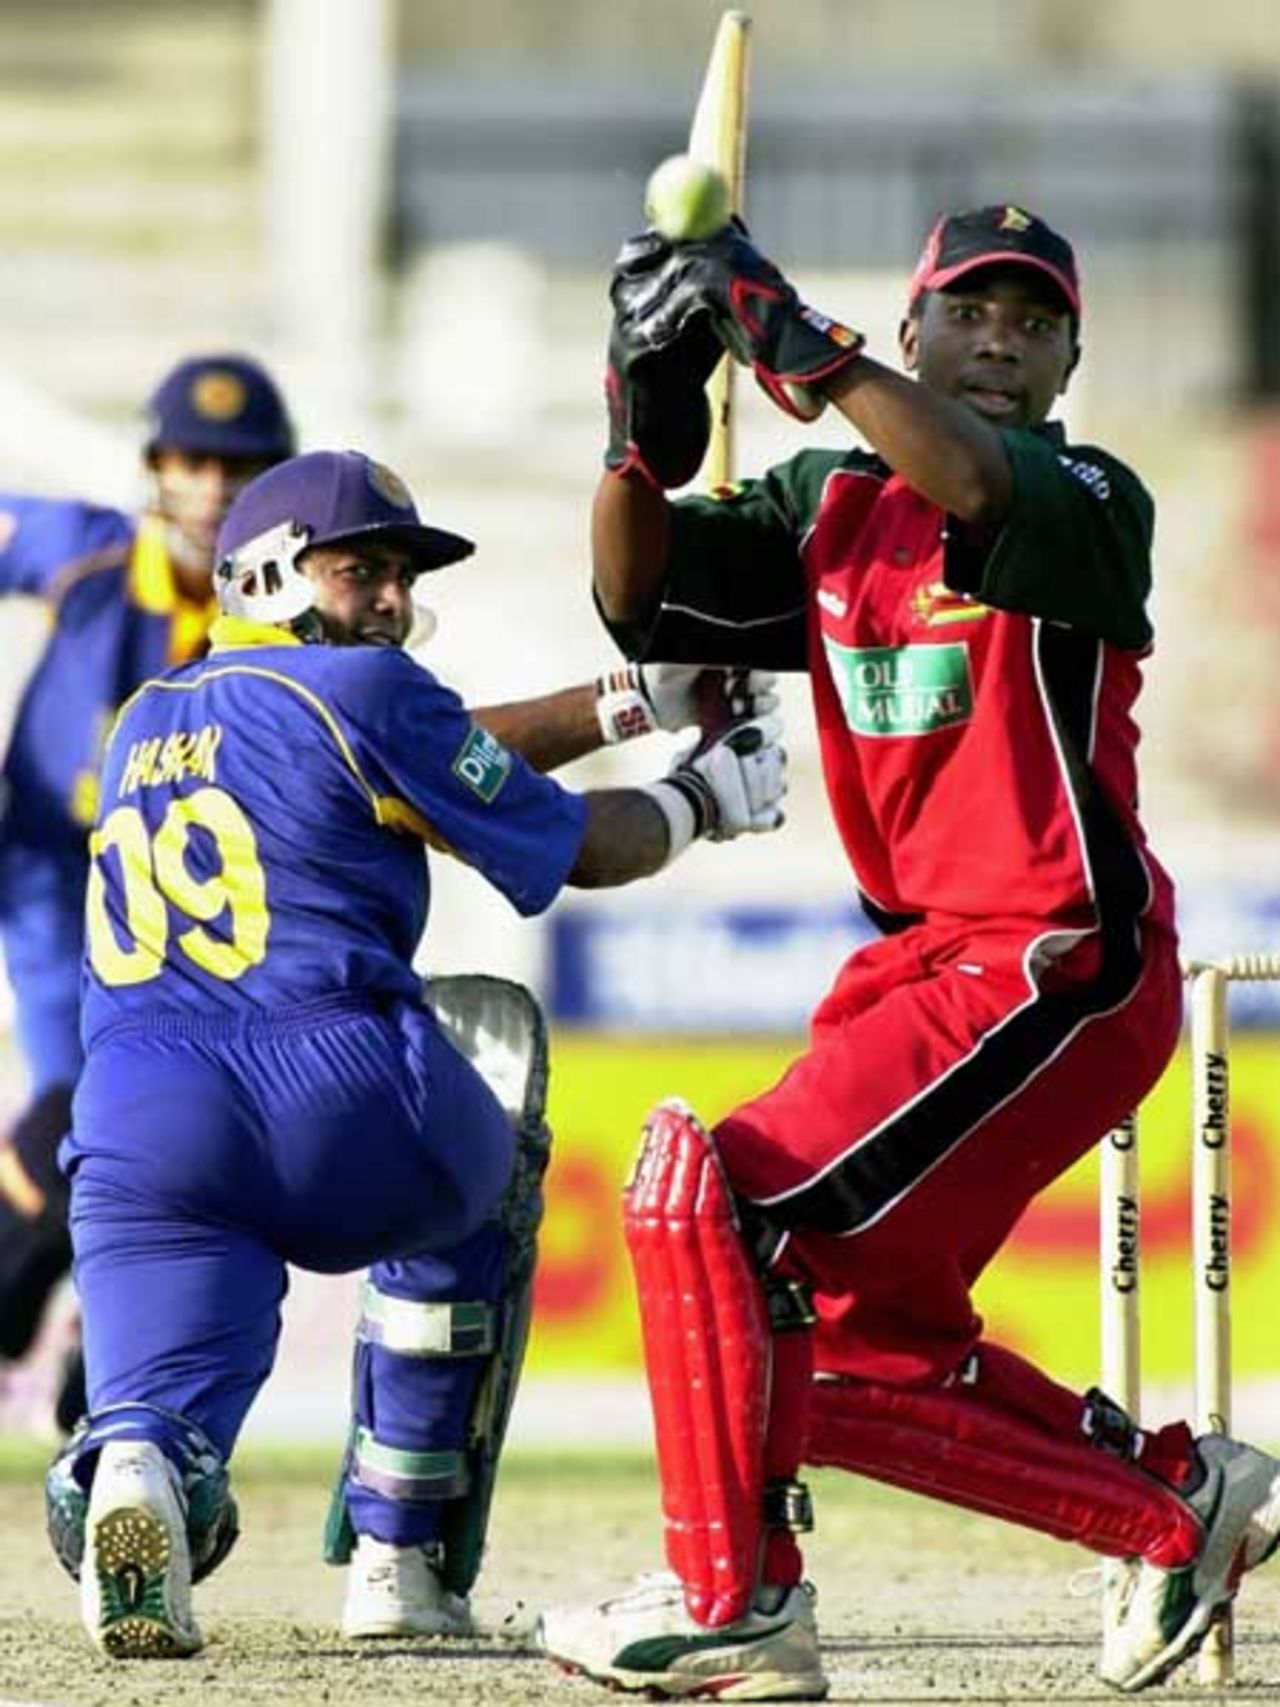 Zimbabwe wicketkeeper Tatenda Taibu (R) misses a ball played by Sri Lankan batsman Hashan Tillekratne (L) during the fifth one-day match of the Four Nation Sharjah Cricket Tournament, 07 April 2003.